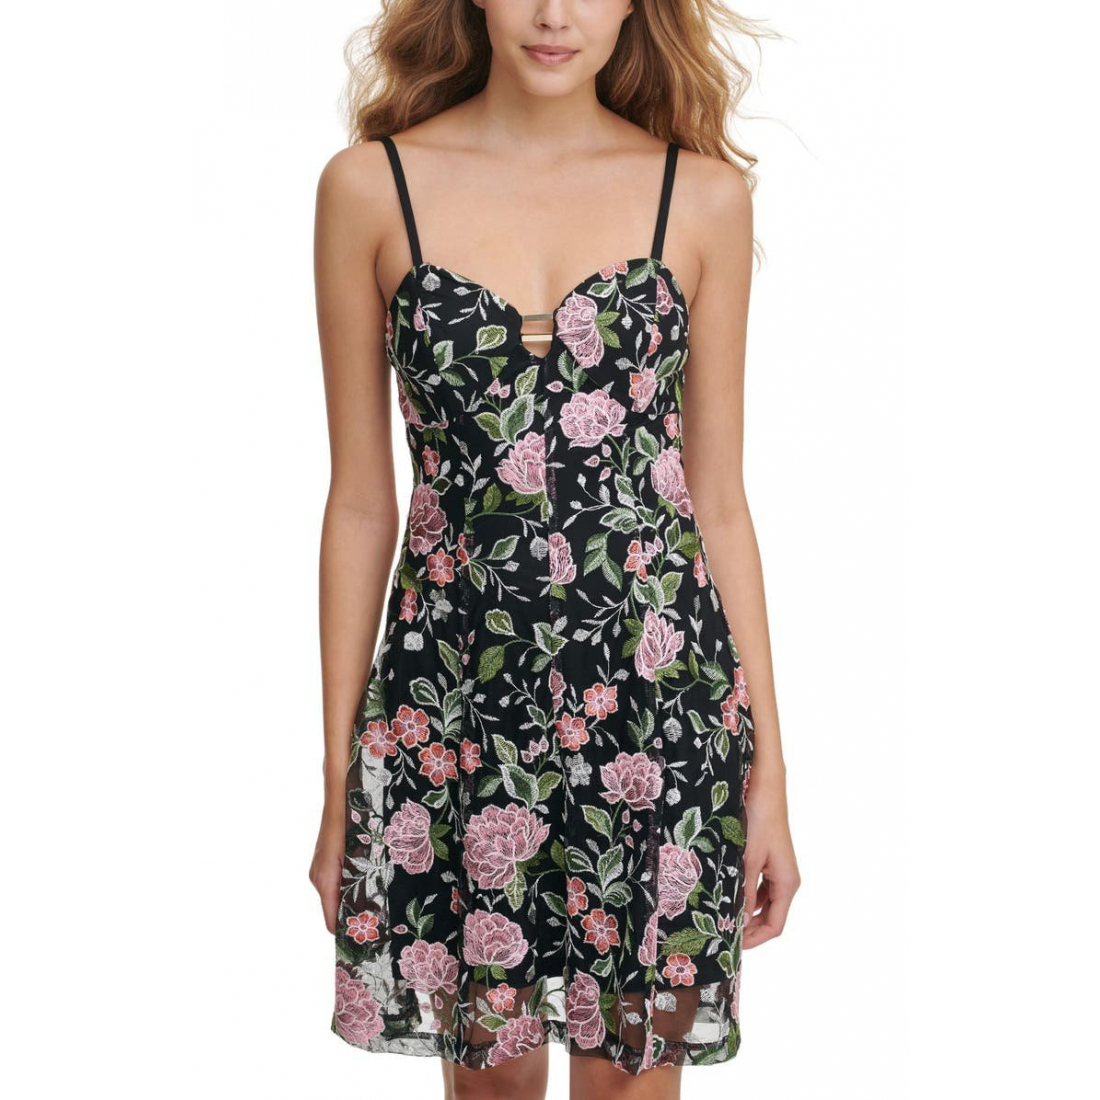 Women's 'Floral Embroidered' Fit & Flare Dress